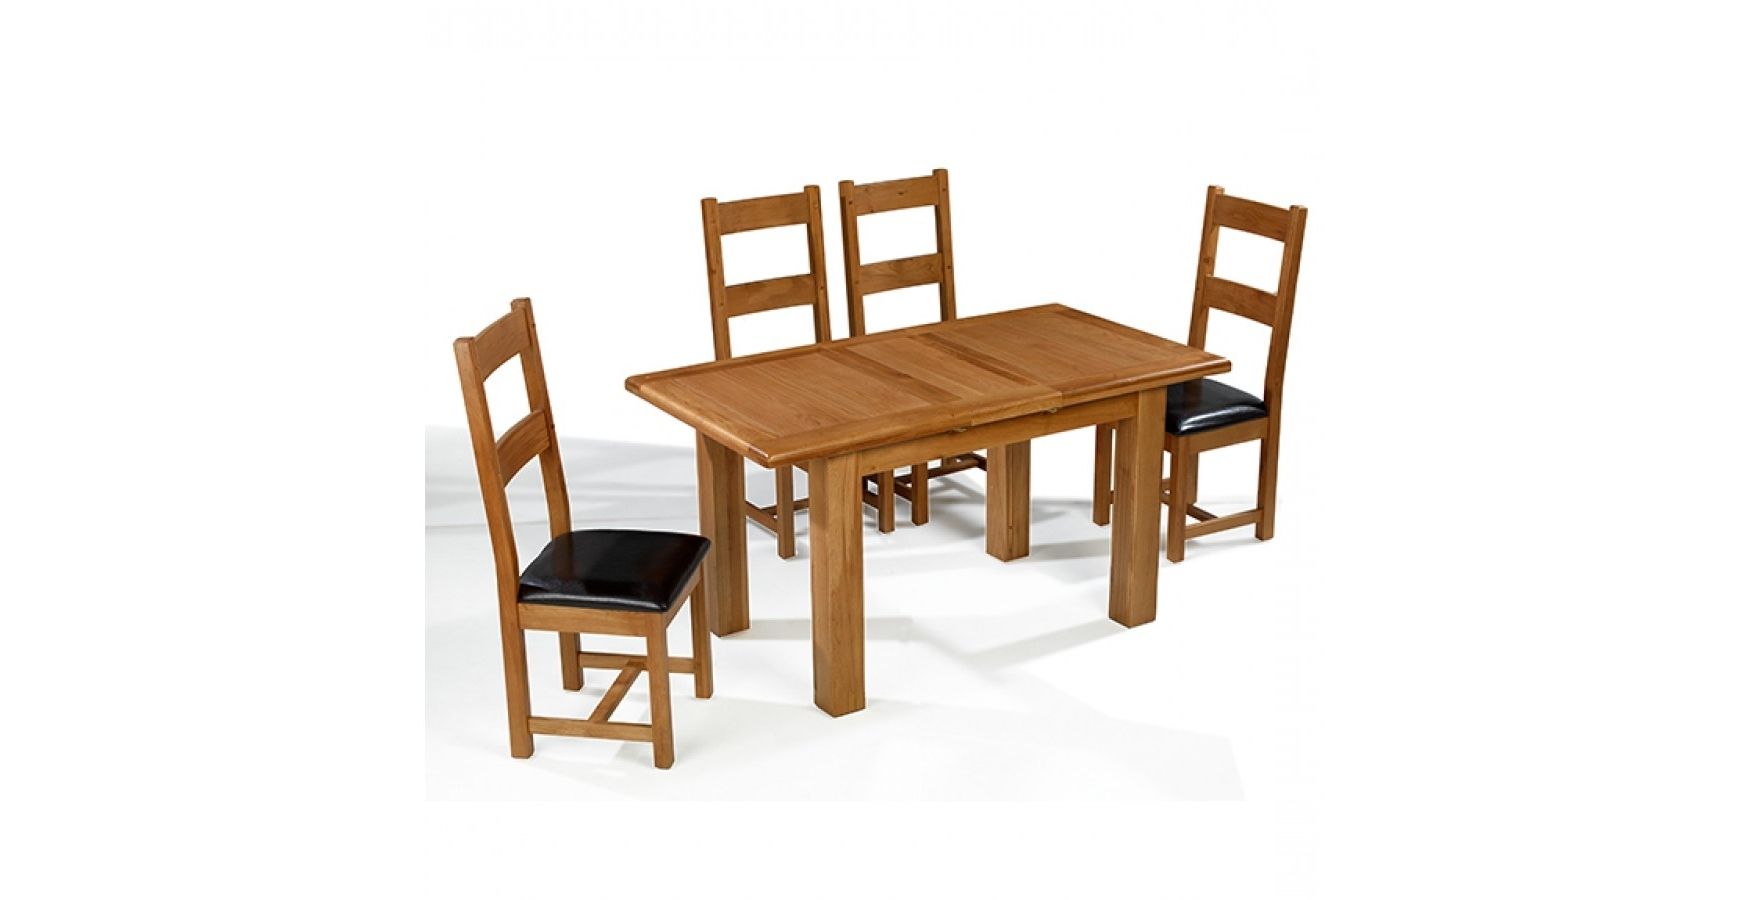 Best And Newest Extending Dining Tables And 4 Chairs Regarding Emsworth Oak 132 198 Cm Extending Dining Table And 4 Chairs (View 8 of 25)